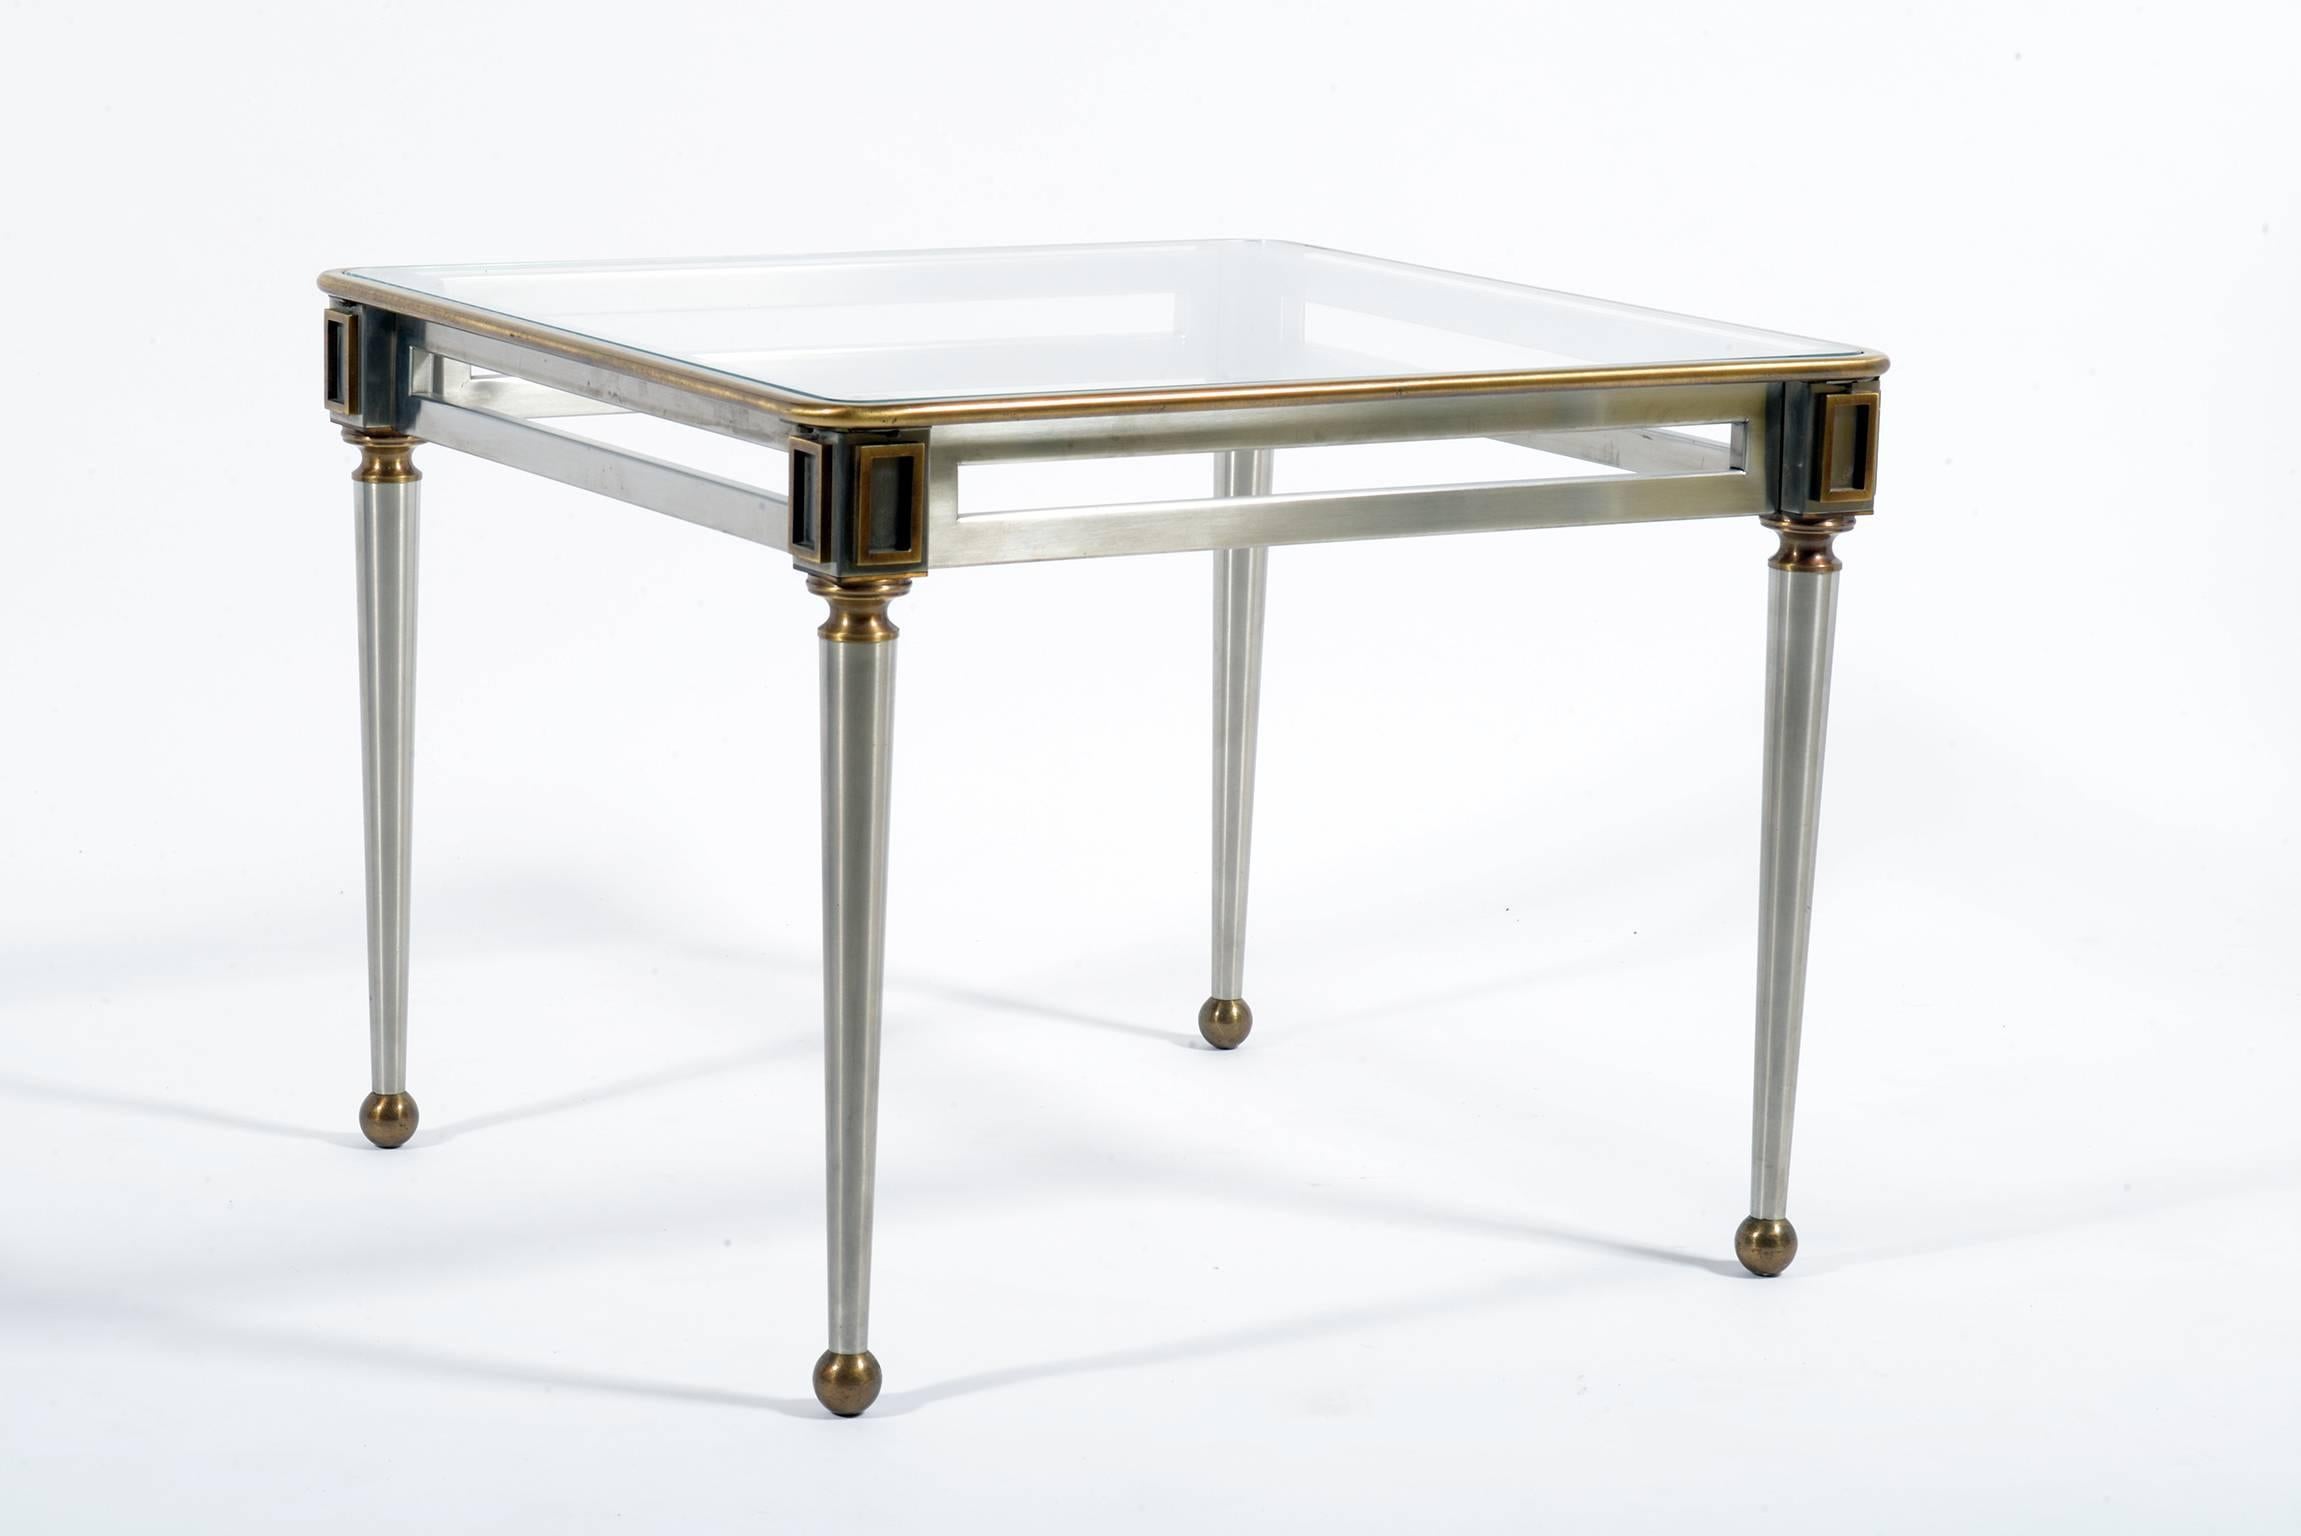 Pair of Mid-Century steel and brass details elegant squared side table or nightstand, glass top.
Banci Florence, Italy, 1960s.
The price is for two.
      